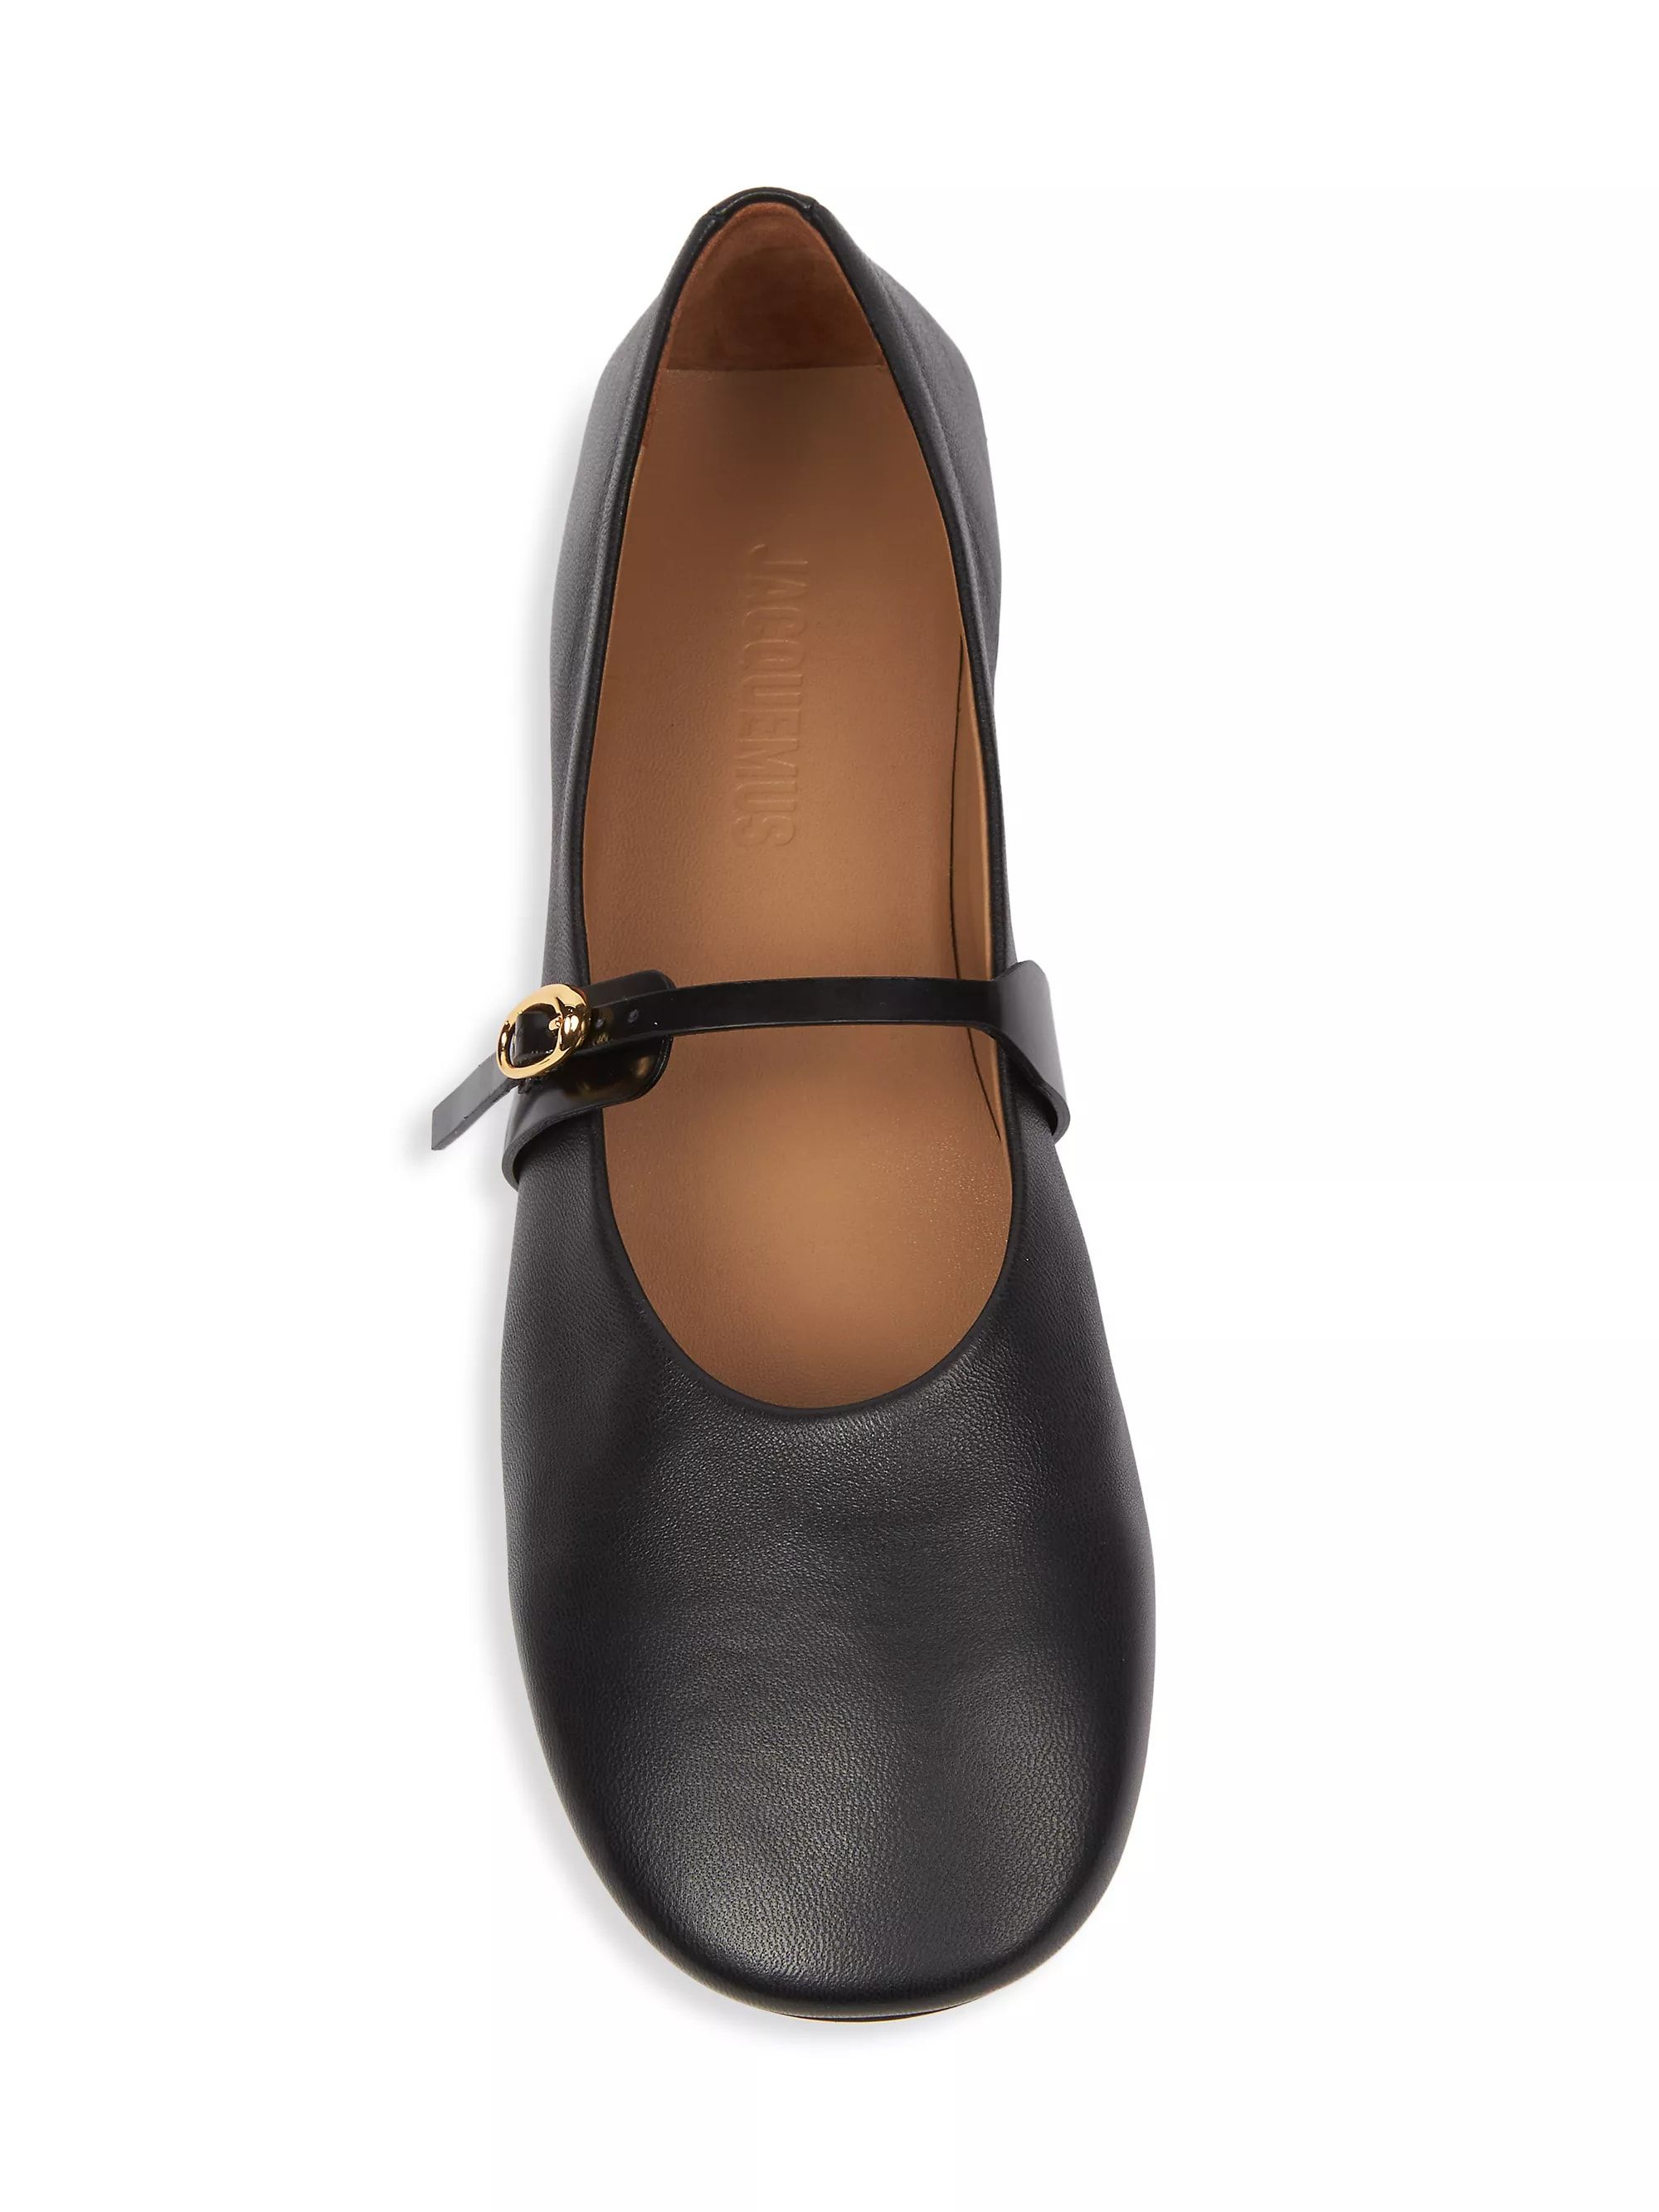 Les Ballerines Rondes Leather Flats | Saks Fifth Avenue